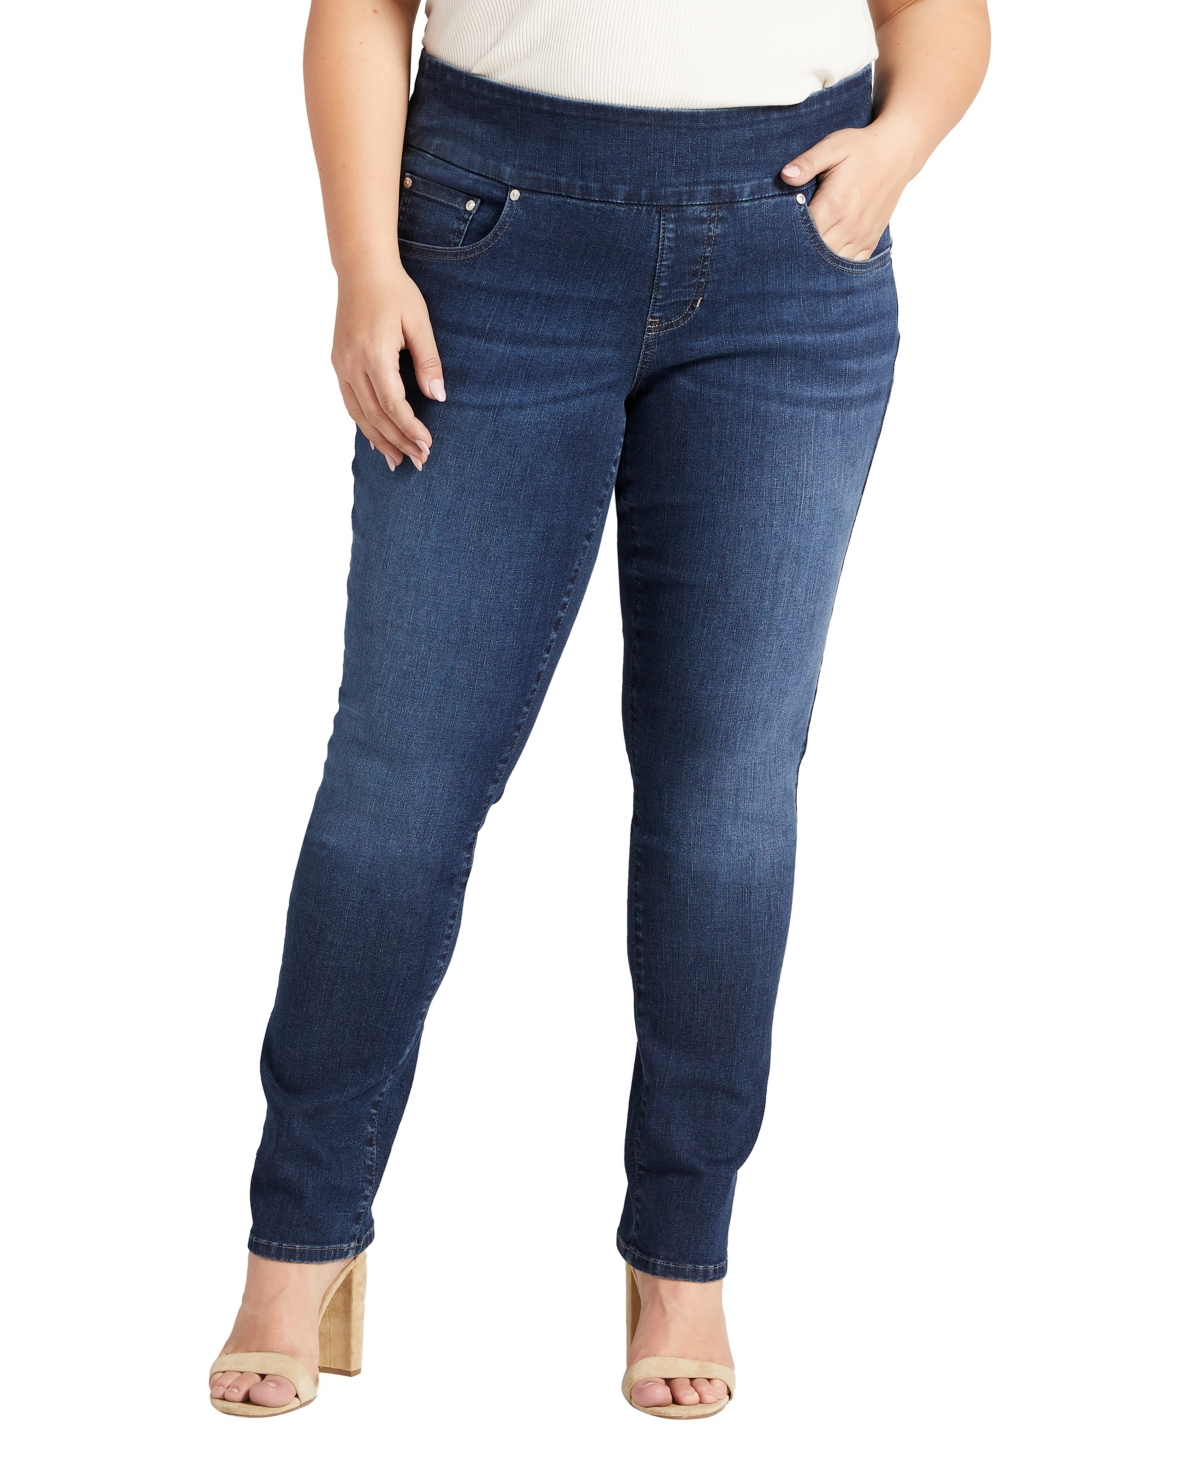 Plus Size Nora Mid Rise Skinny Pull-On Jeans - Anchor Blue